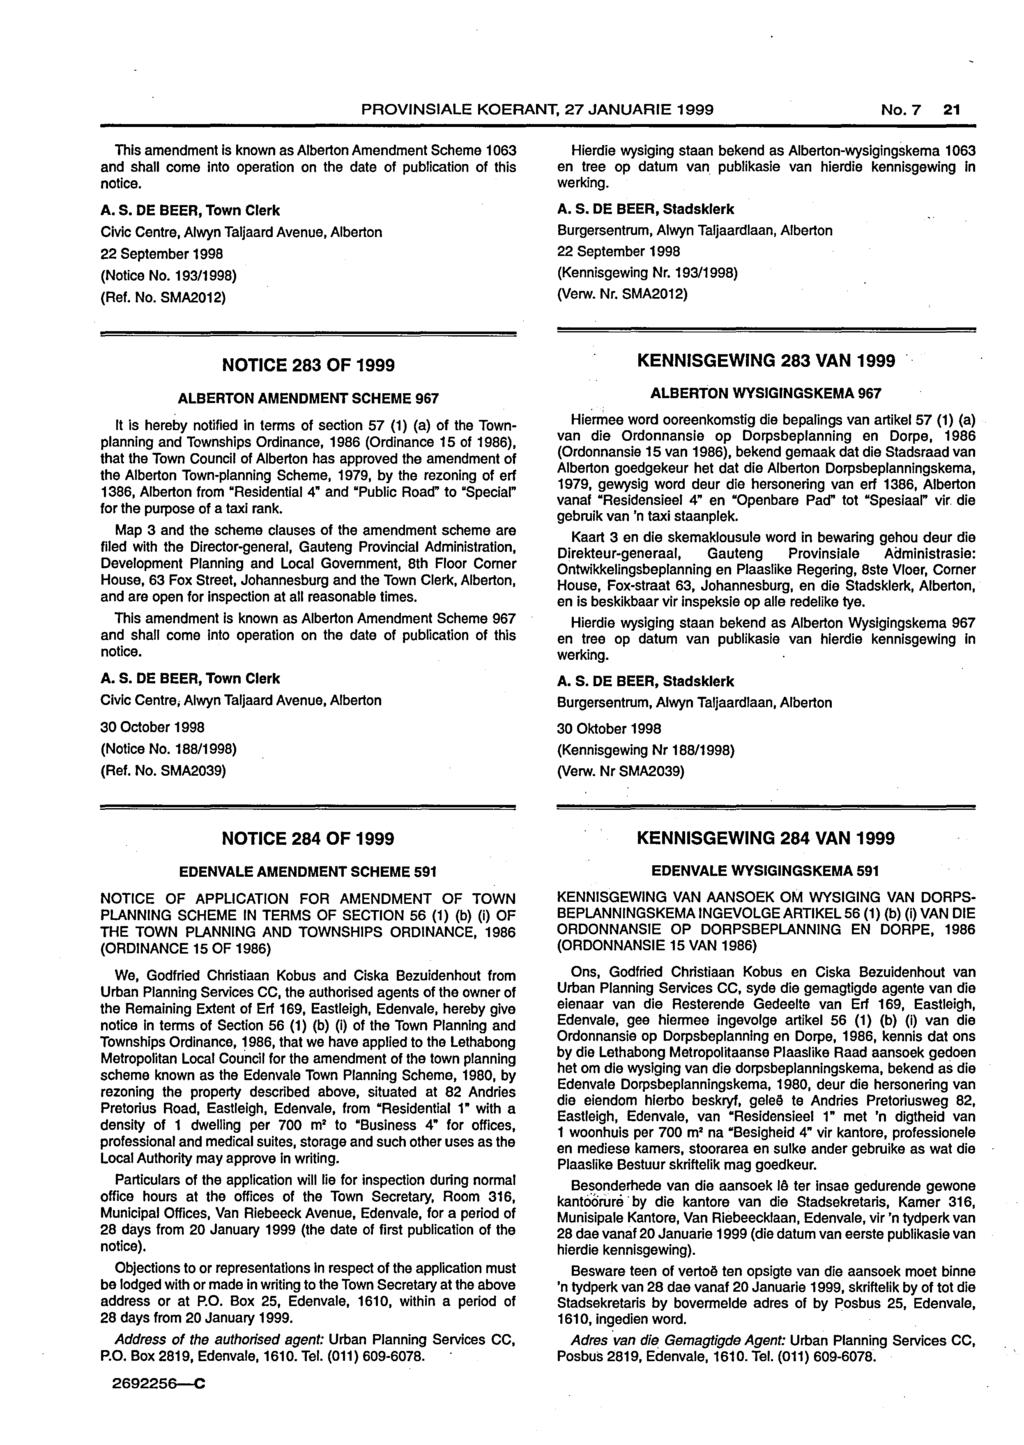 PROVJNSIALE KOERANT, 27 JANUARIE 1999 No.7 21 This amendment is known as Alberton Amendment Scheme 1 063 and shall come into operation on the date of publication of this notice. A. S. DE BEER, Town Clerk Civic Centre, Alwyn Taljaard Avenue, Alberton 22 September 1998 (Notice No.